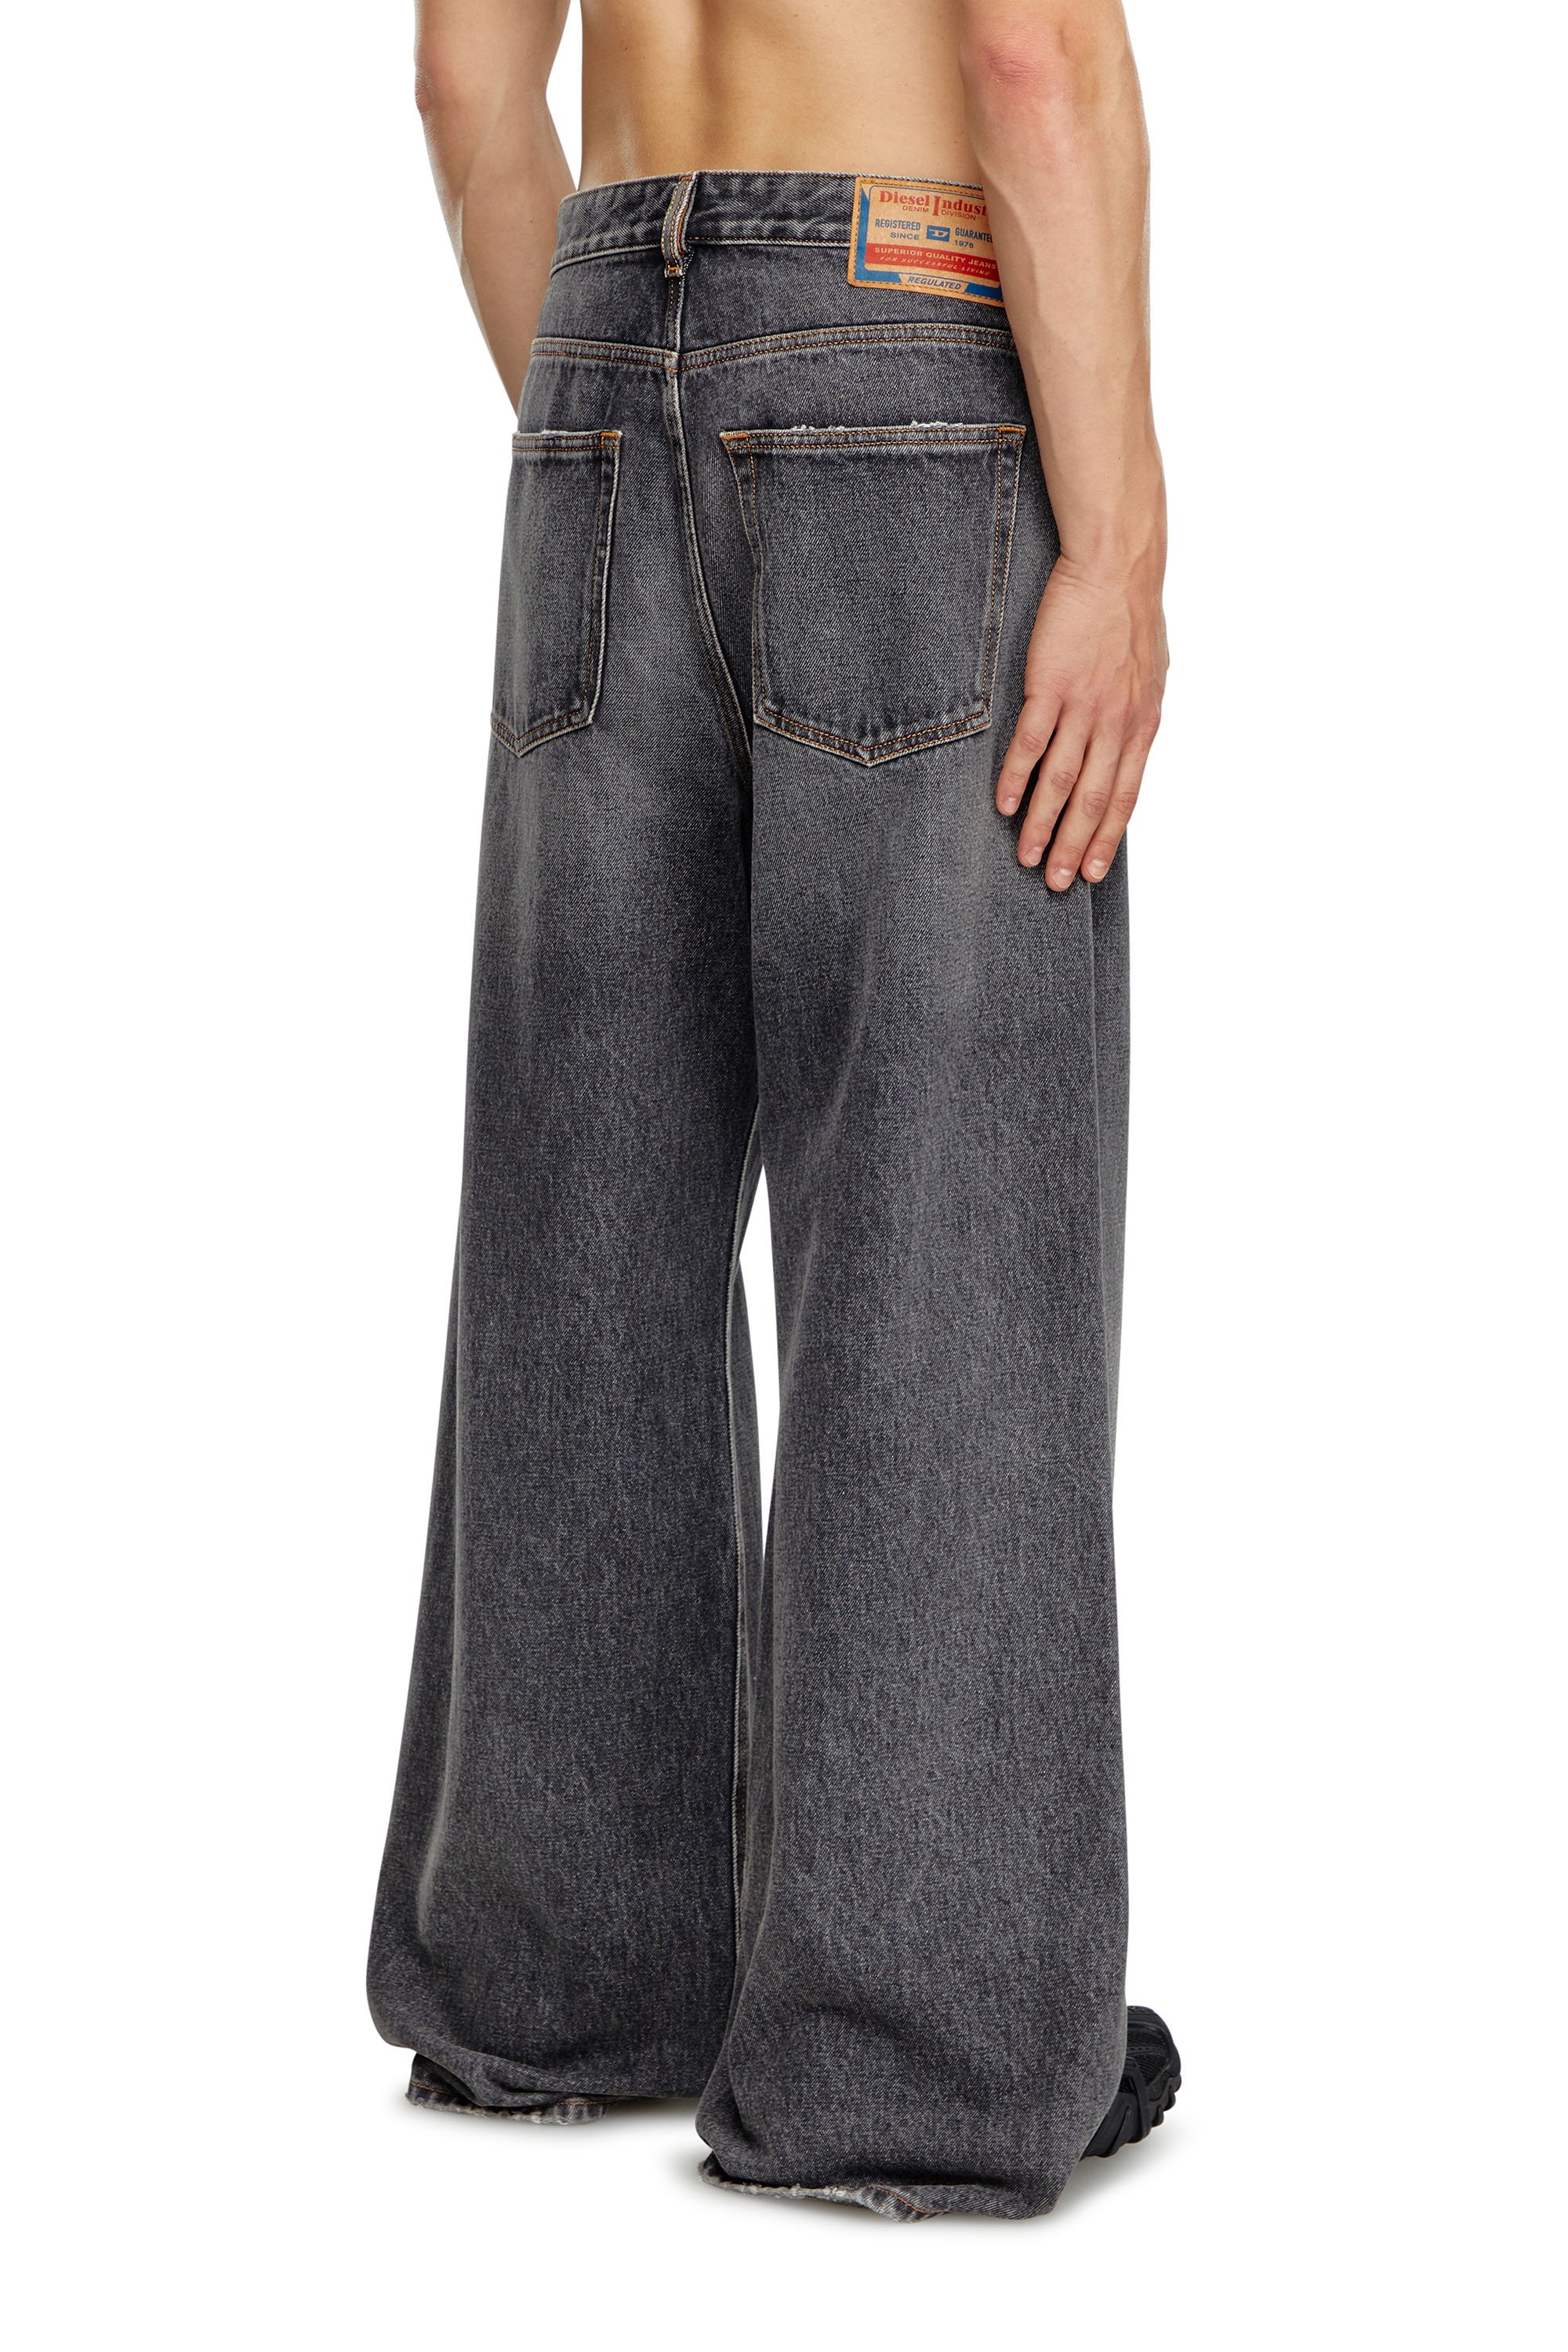 Diesel - Straight Jeans D-Rise 007F6, Hombre Straight Jeans - D-Rise in Negro - Image 4